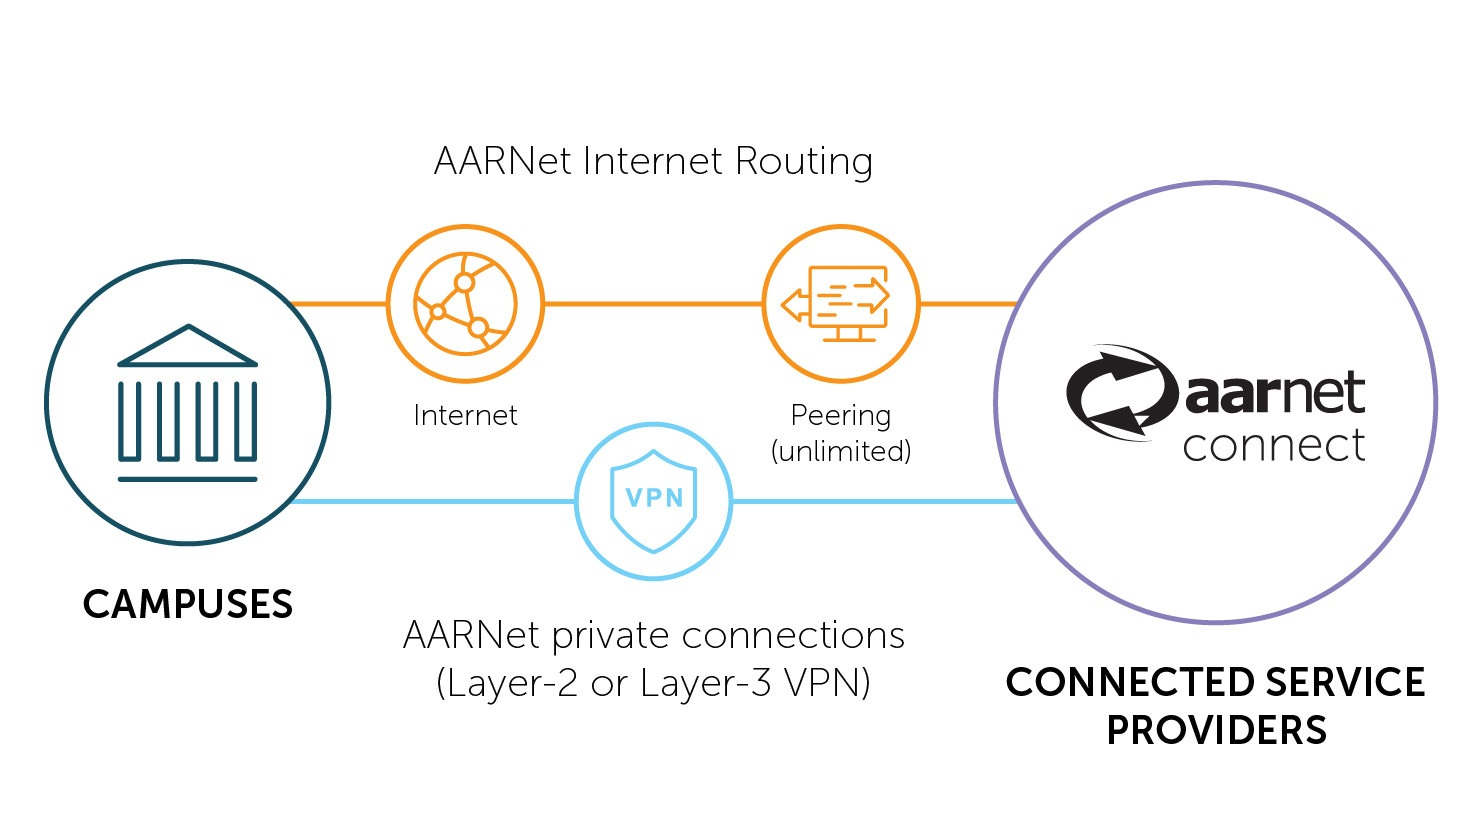 How we connect your campus to AARNet Connect service providers